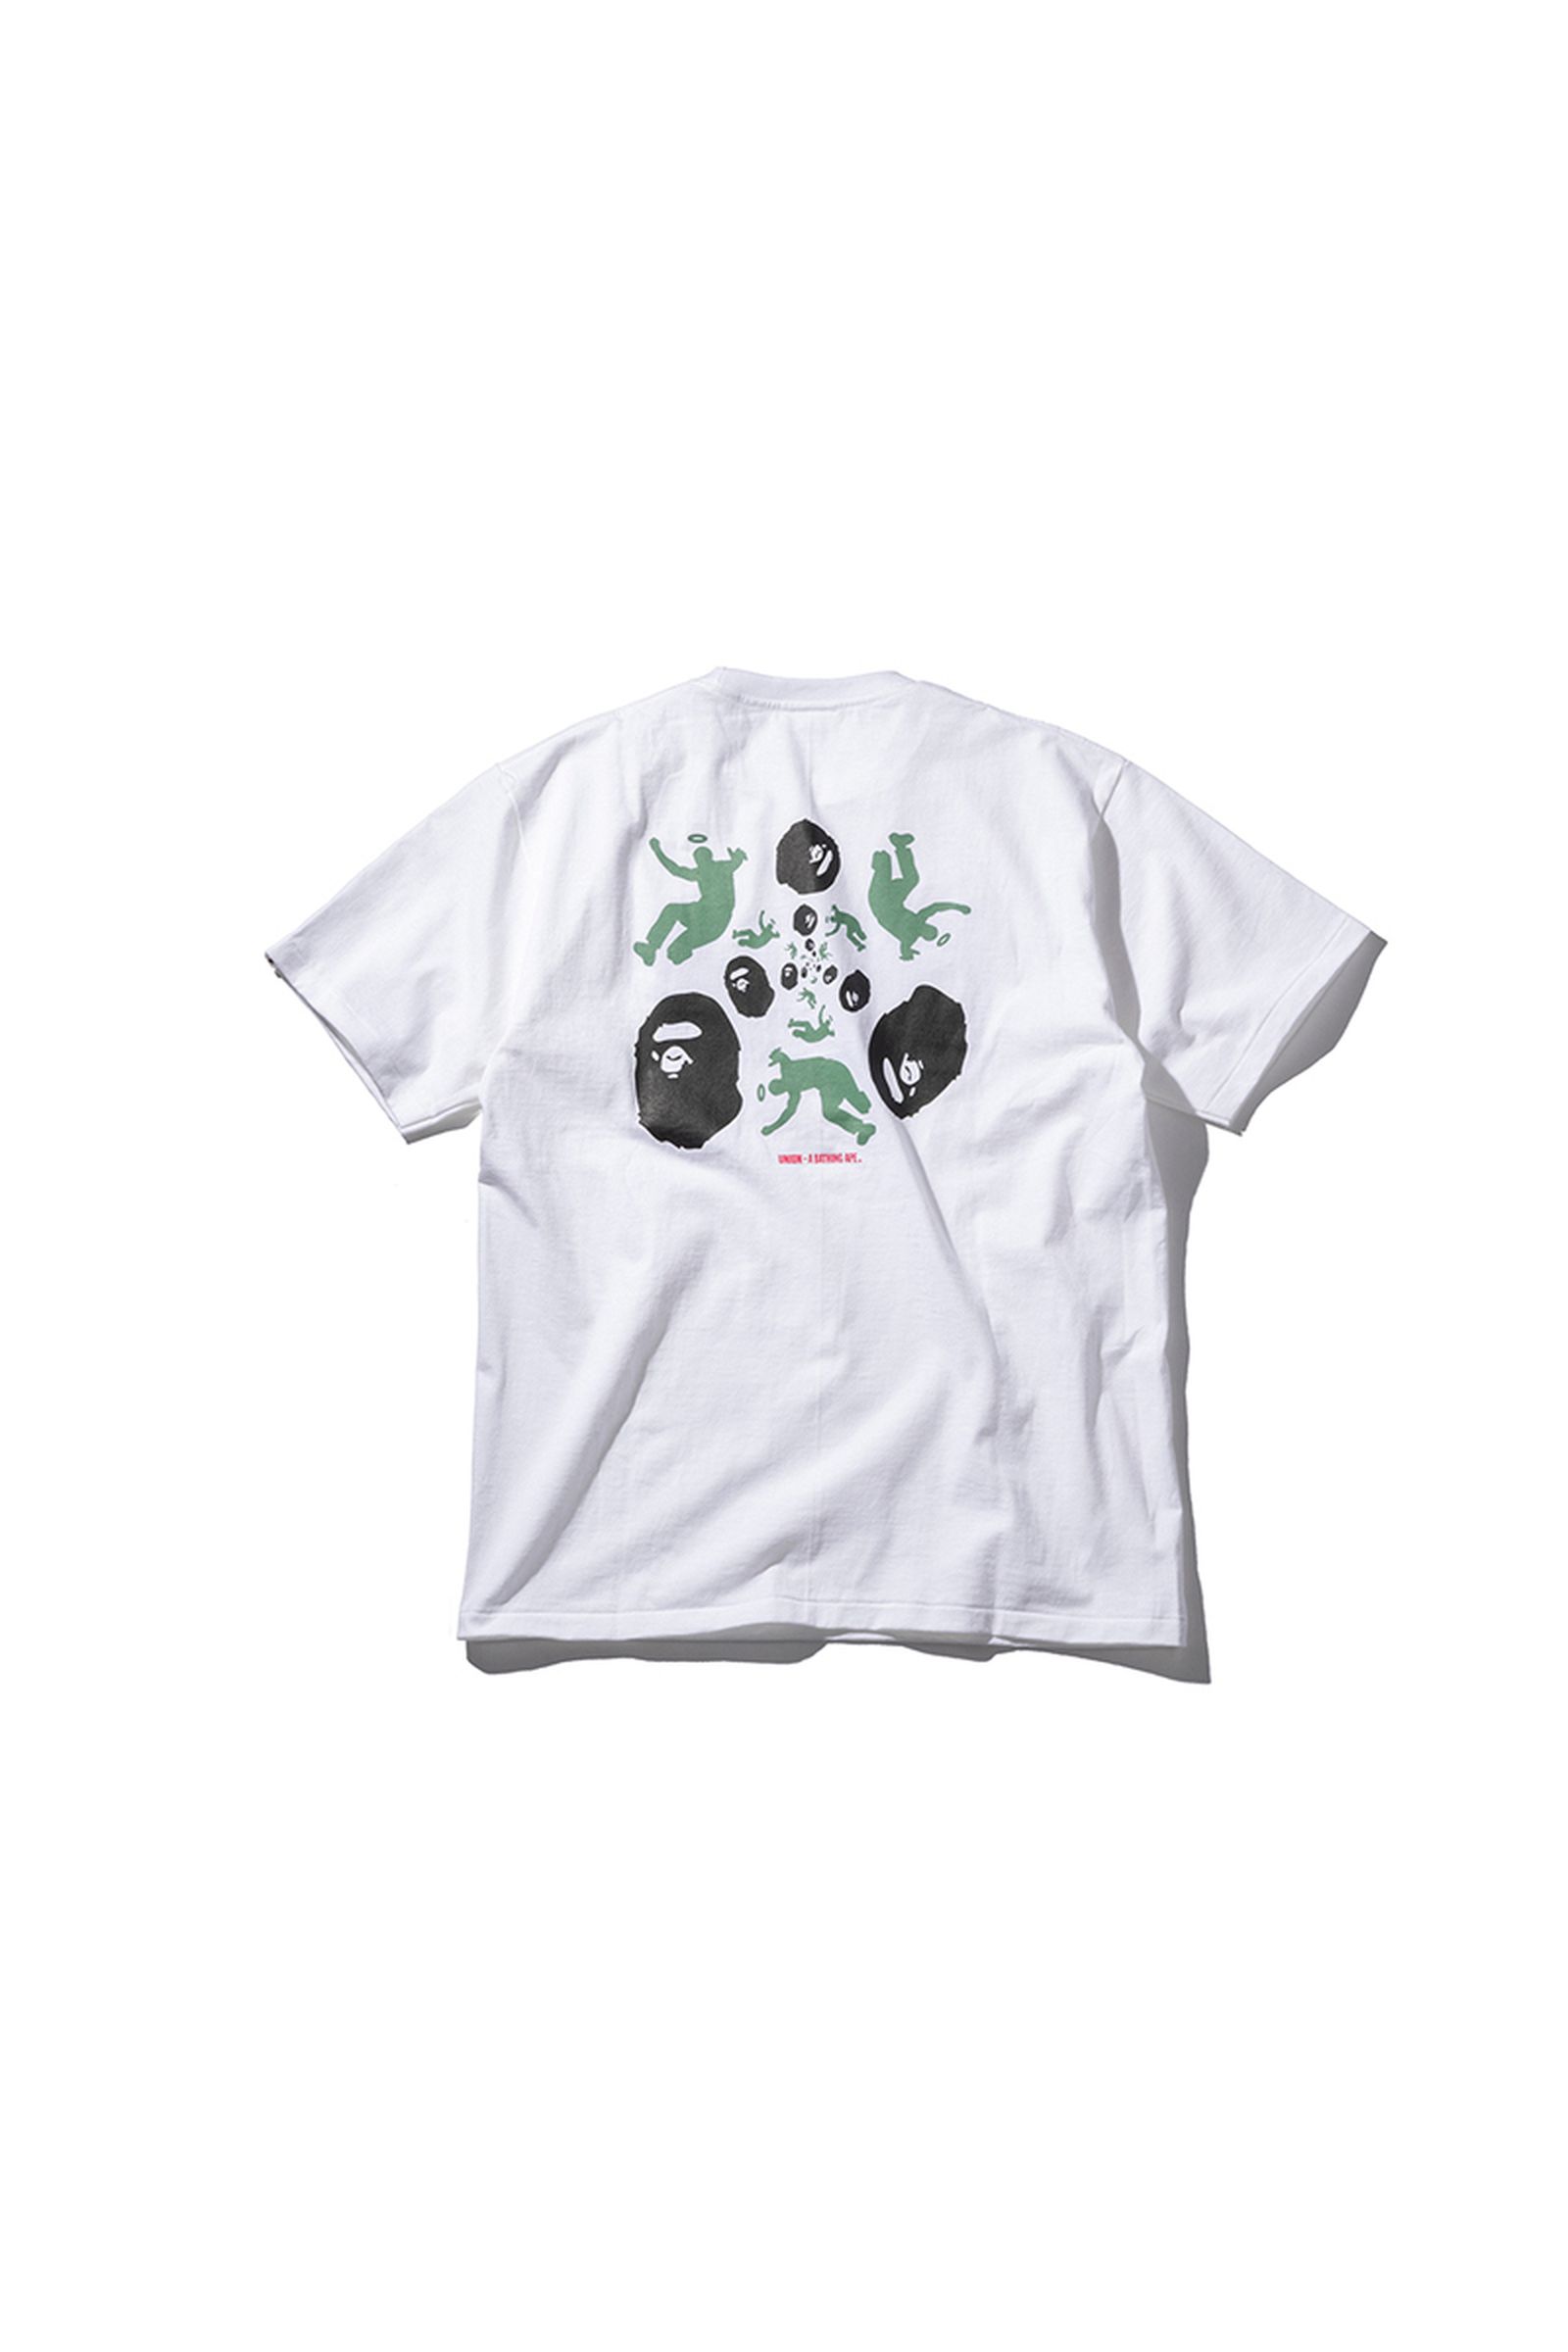 bape-union-30-year-anniversary-collab-collection (6)